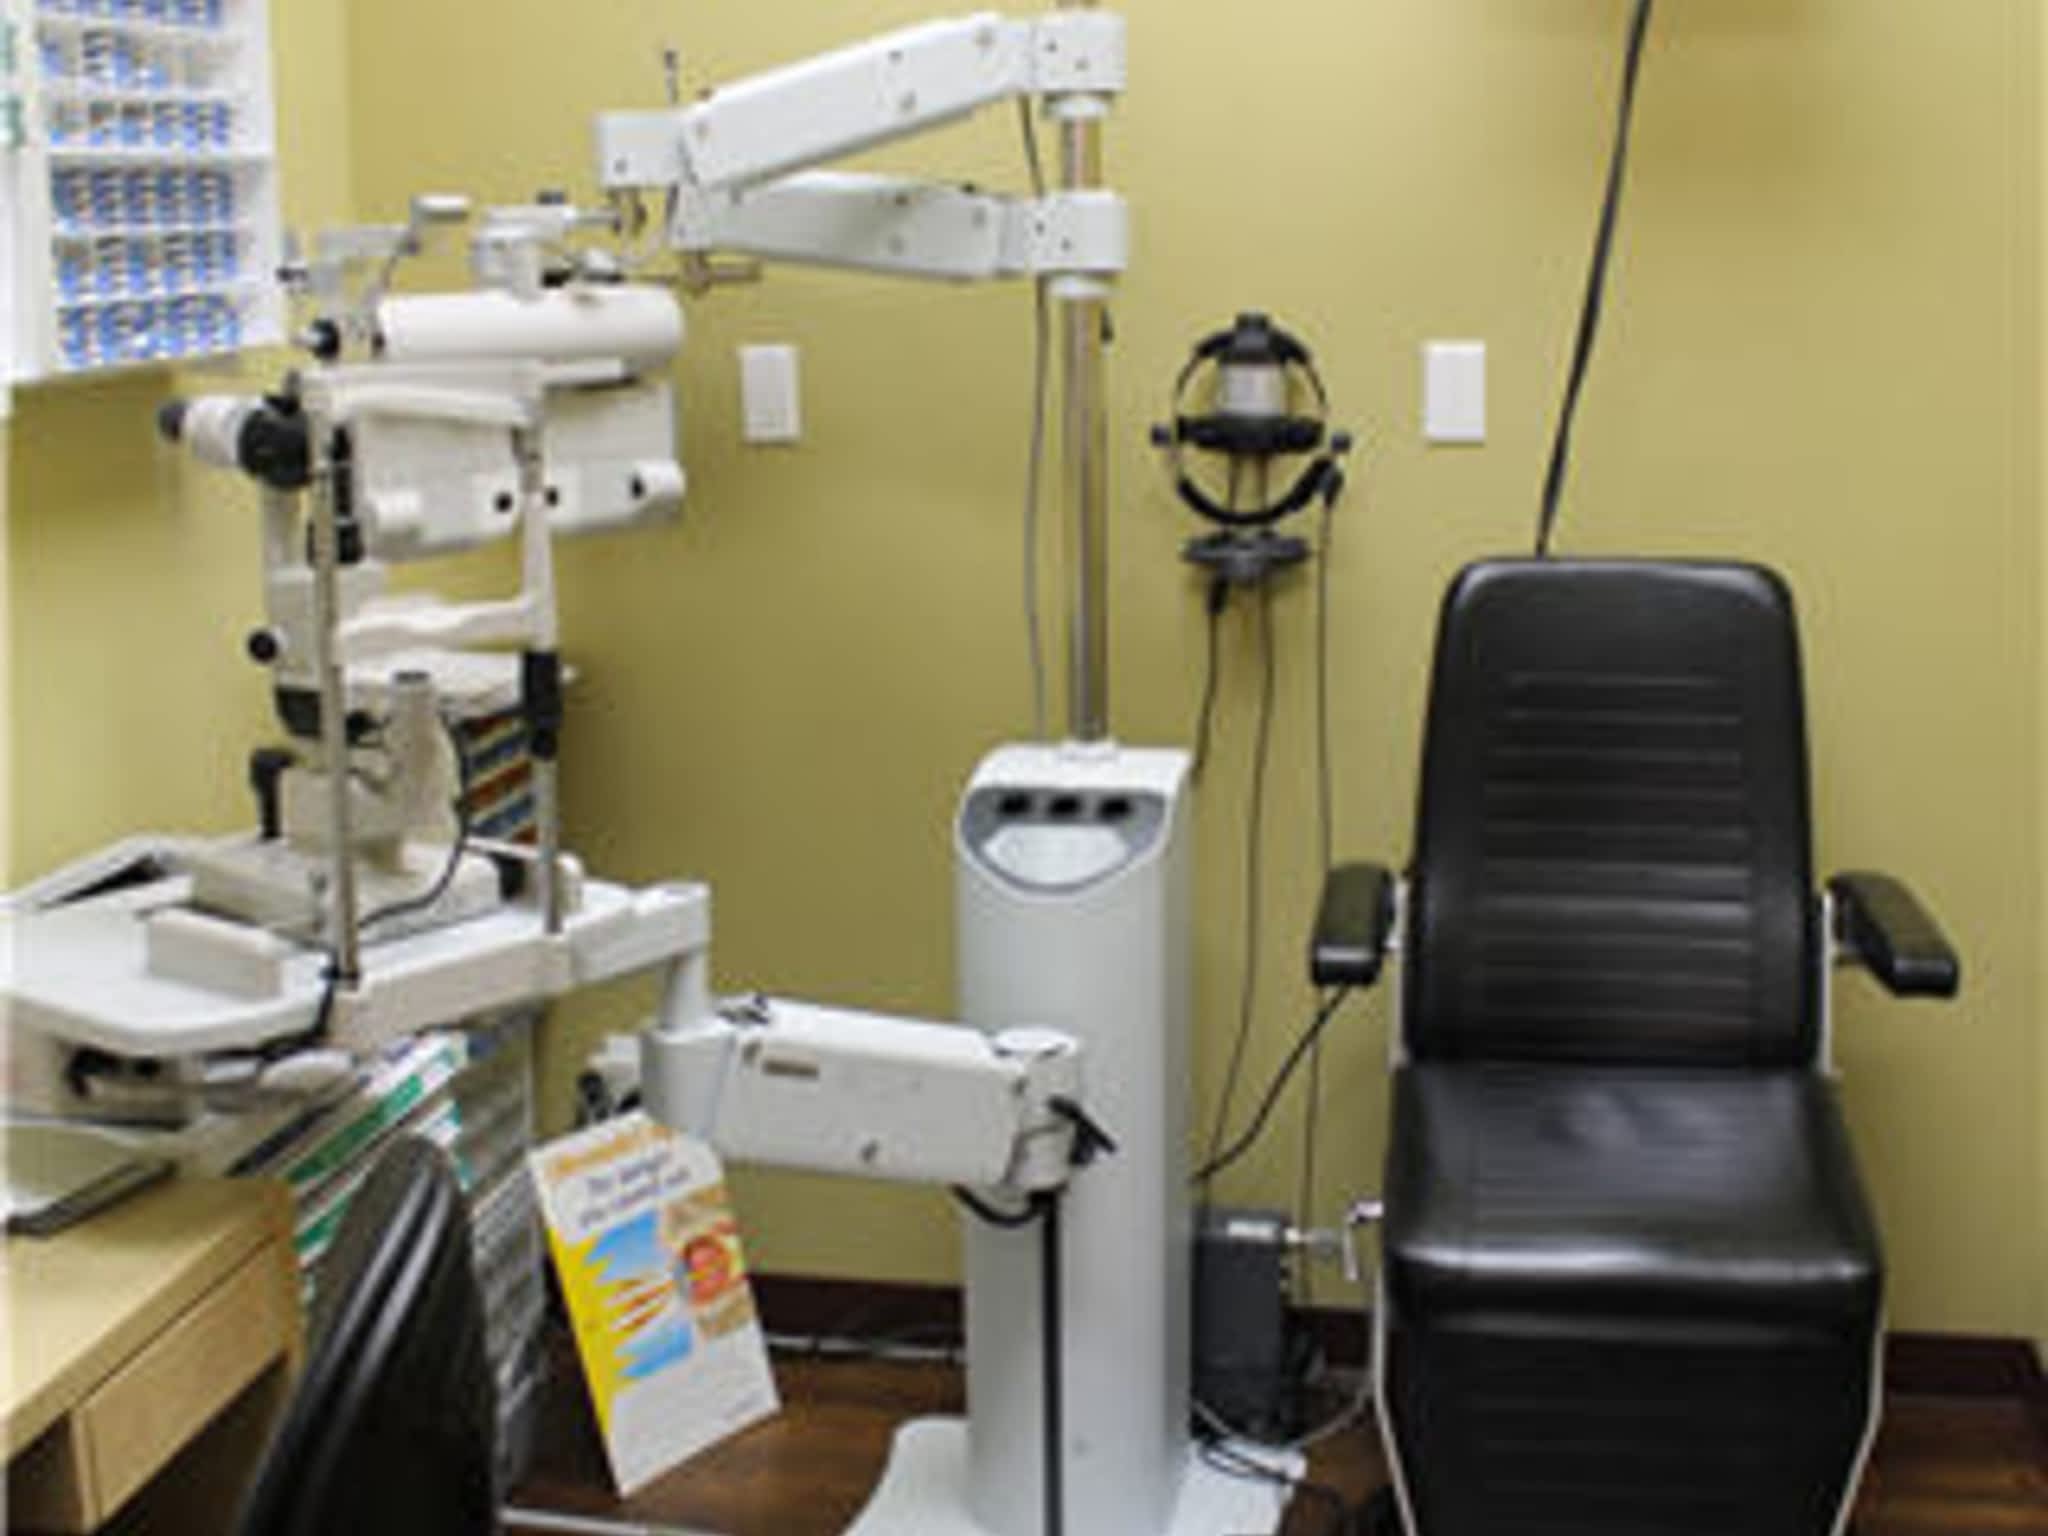 photo Crystal Vision Centre